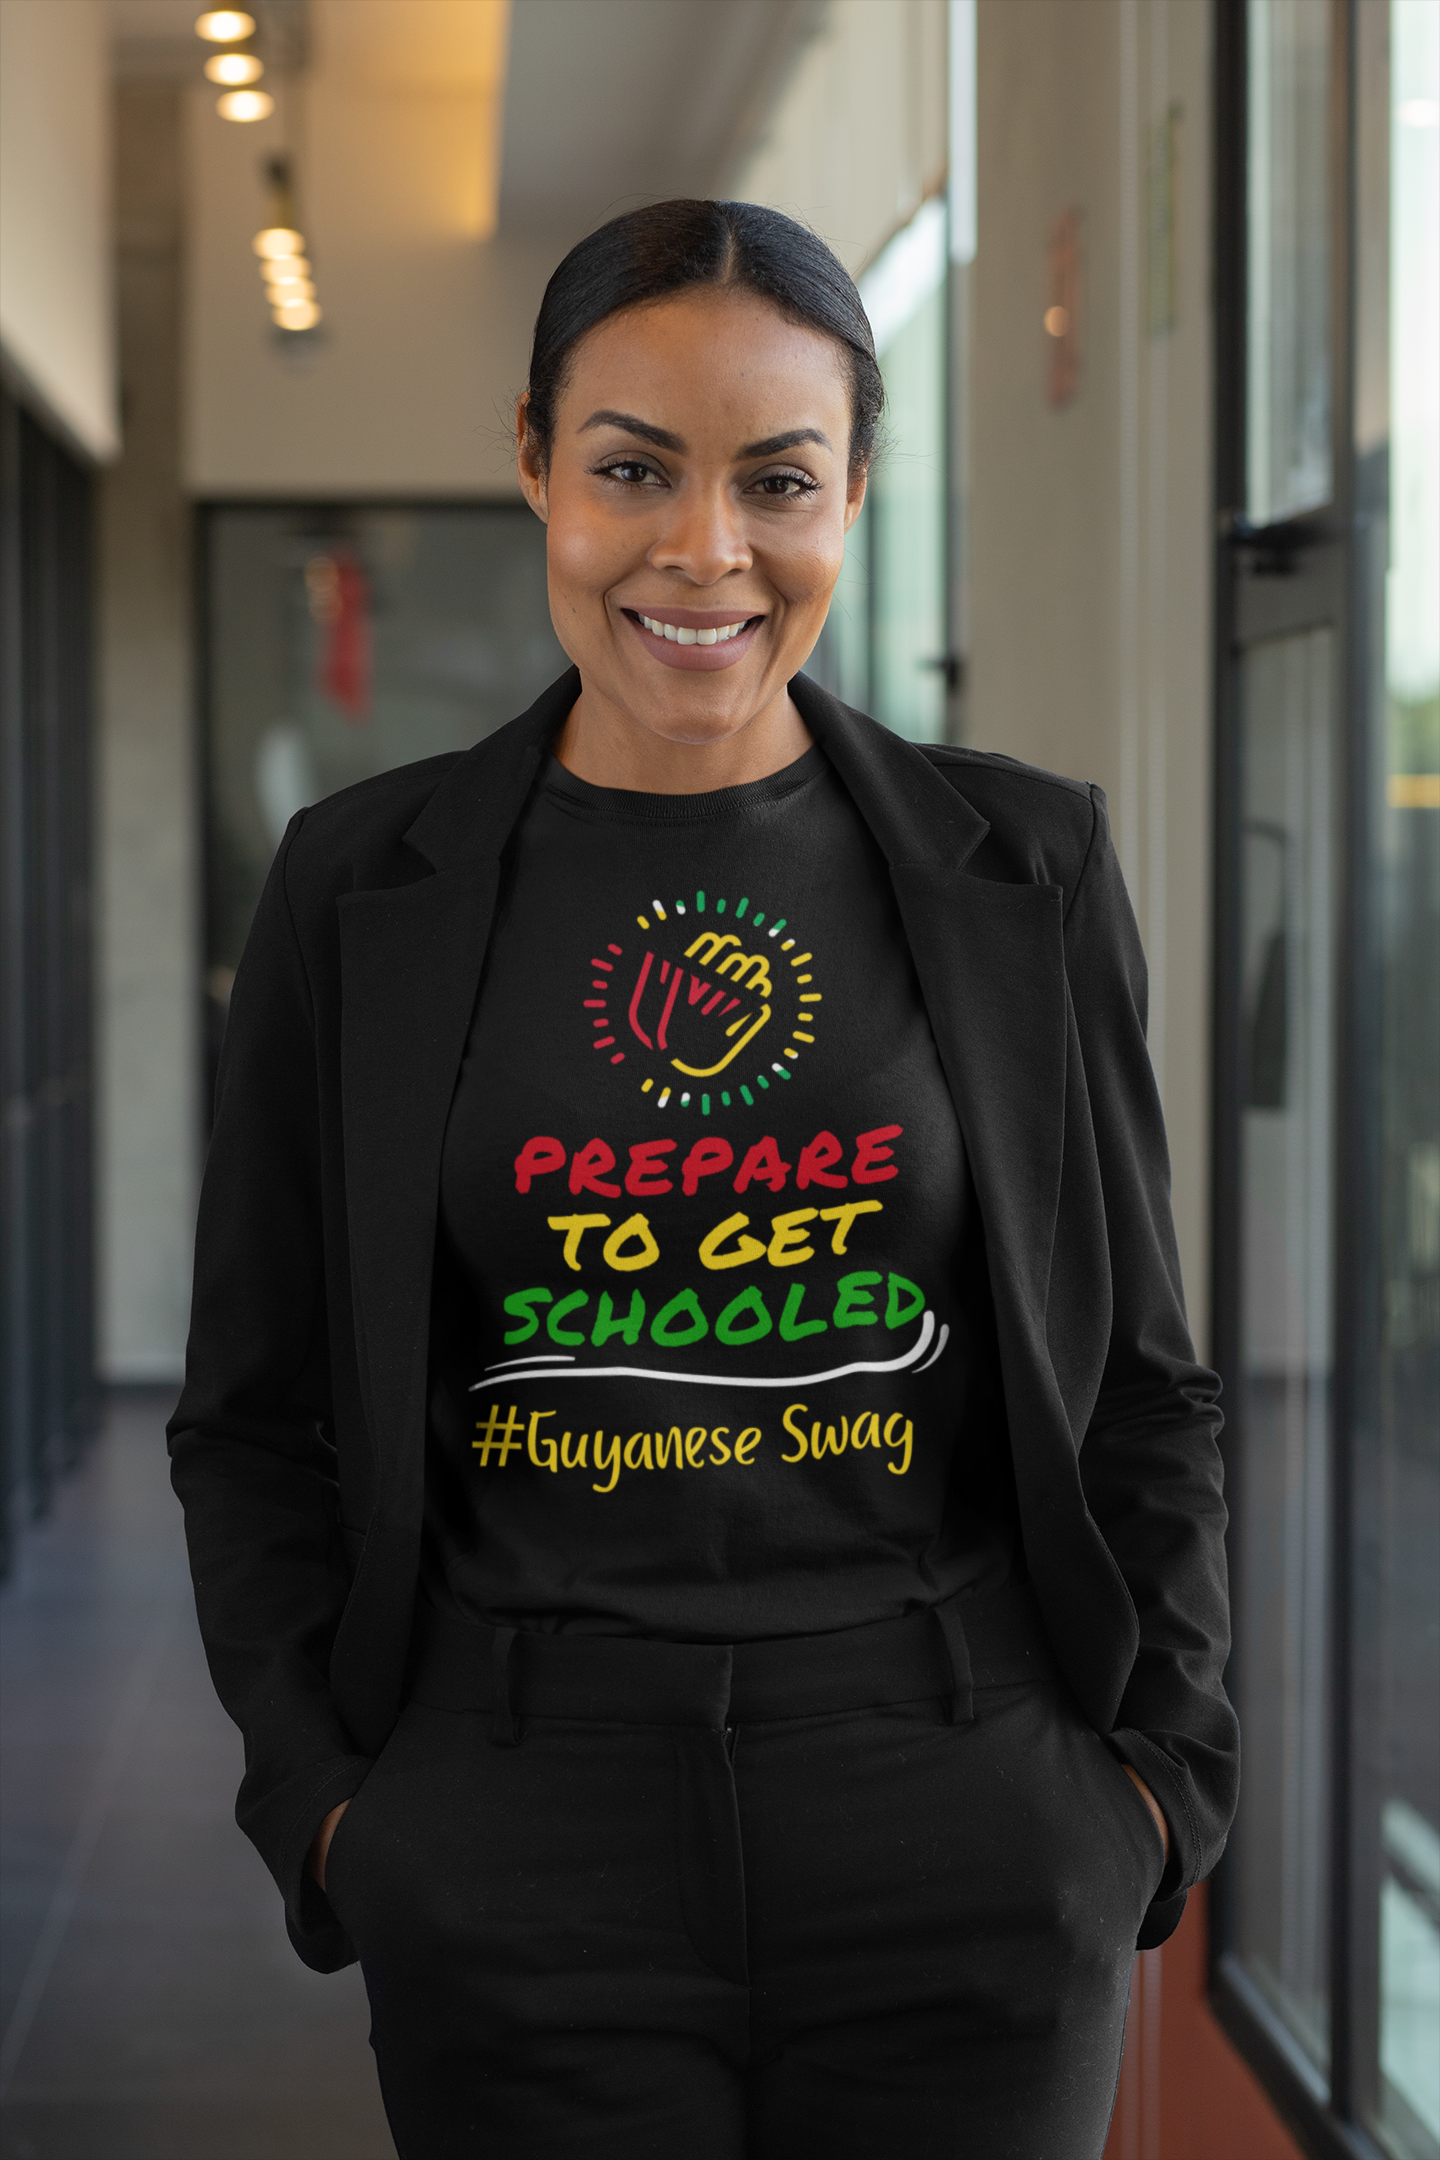 Guyanese Swag Prepared to Get Schooled Woman's Black Softstyle Tee with Guyana Flag.